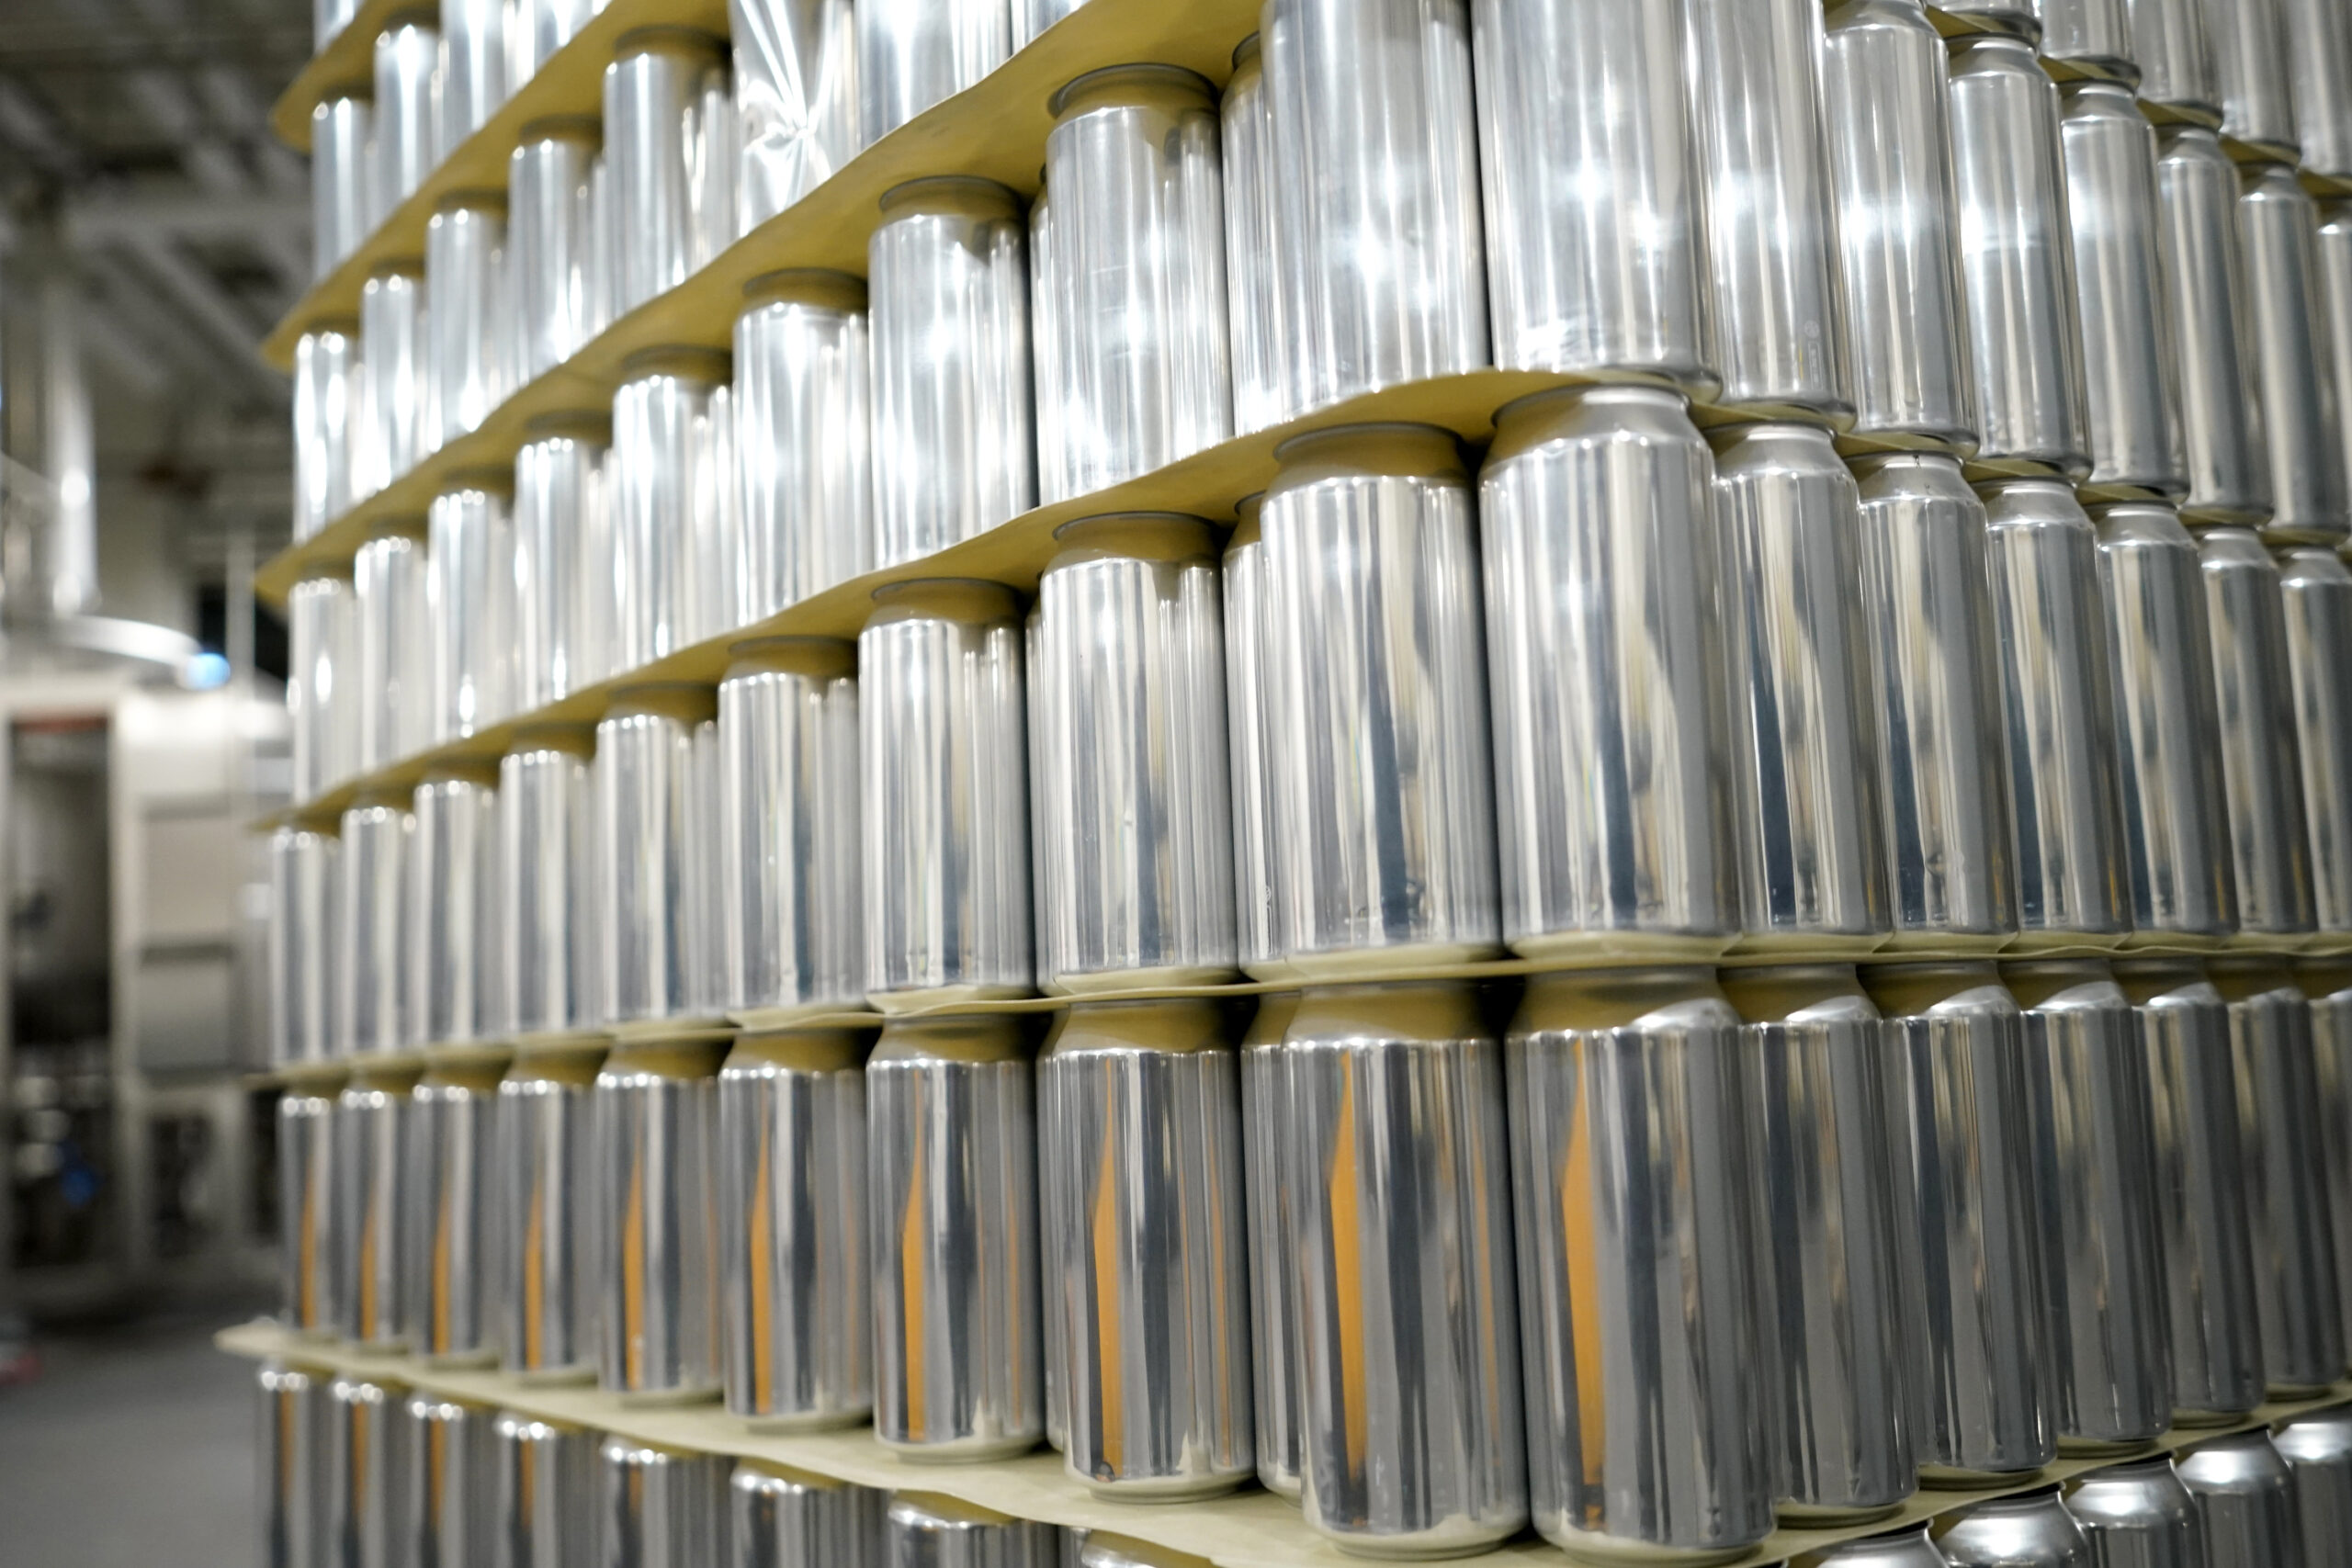 Aluminum cans are still hard to come by for beverage companies